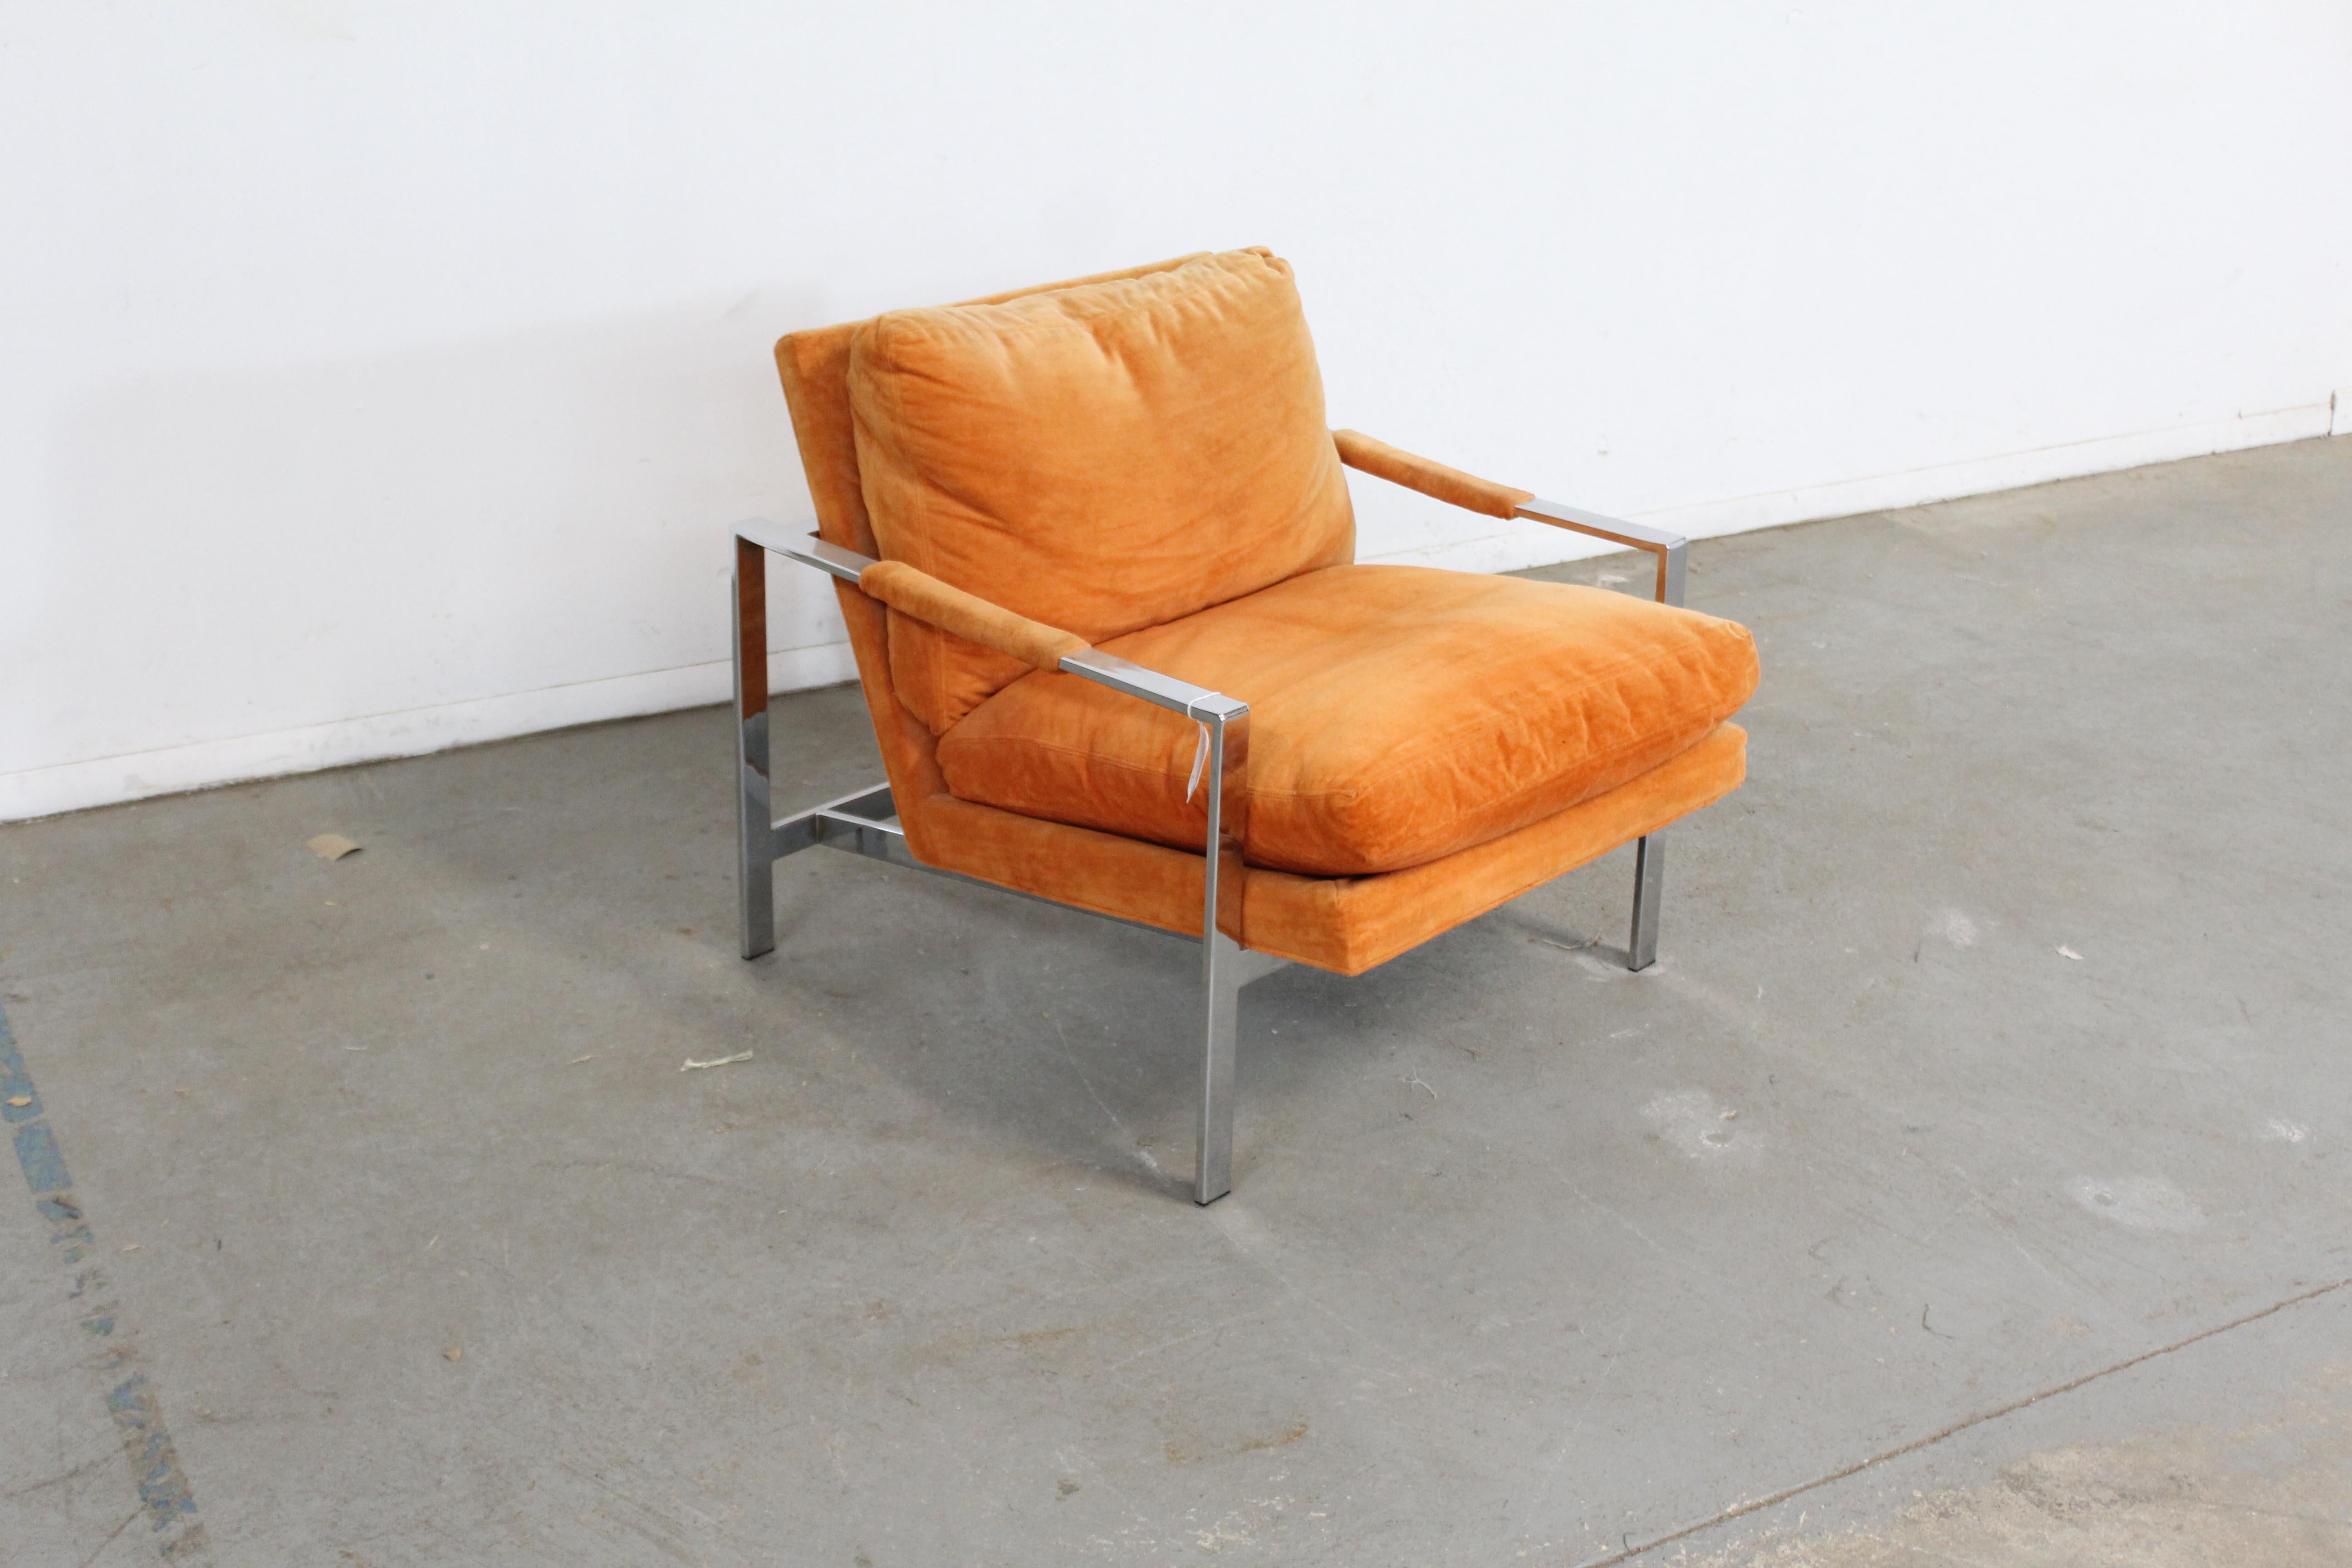 Offered is a vintage Mid-Century Modern lounge chair, designed by Milo Baughman for Thayer Coggin. Timeless clean lines provide the look that has been often copied by others, but never mastered like this. This piece has a chrome base with orange